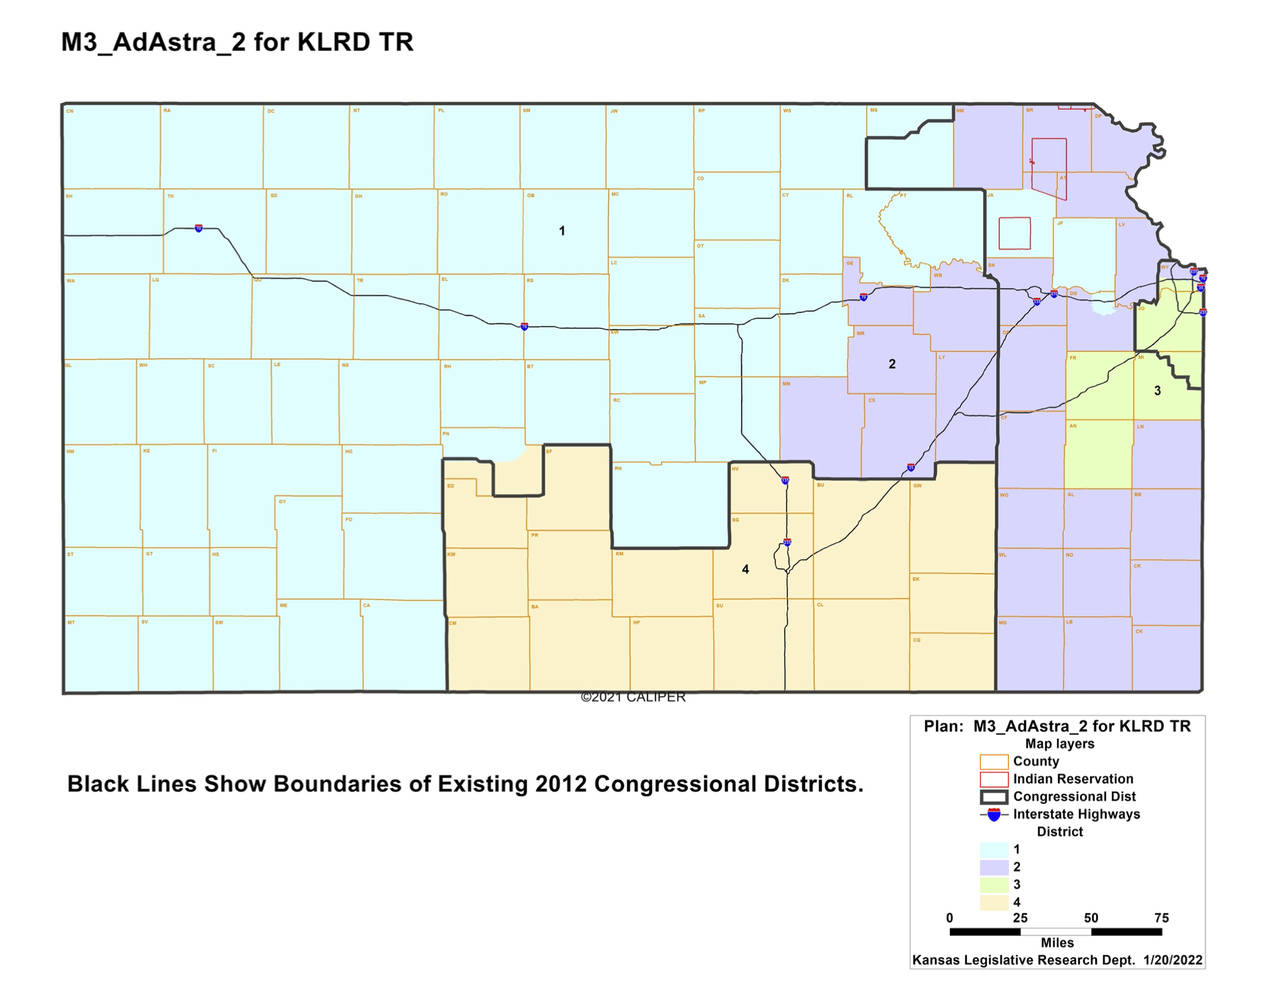 This image shows the "Ad Astra 2" congressional redistricting plan for Kansas drafted by the Kansas...